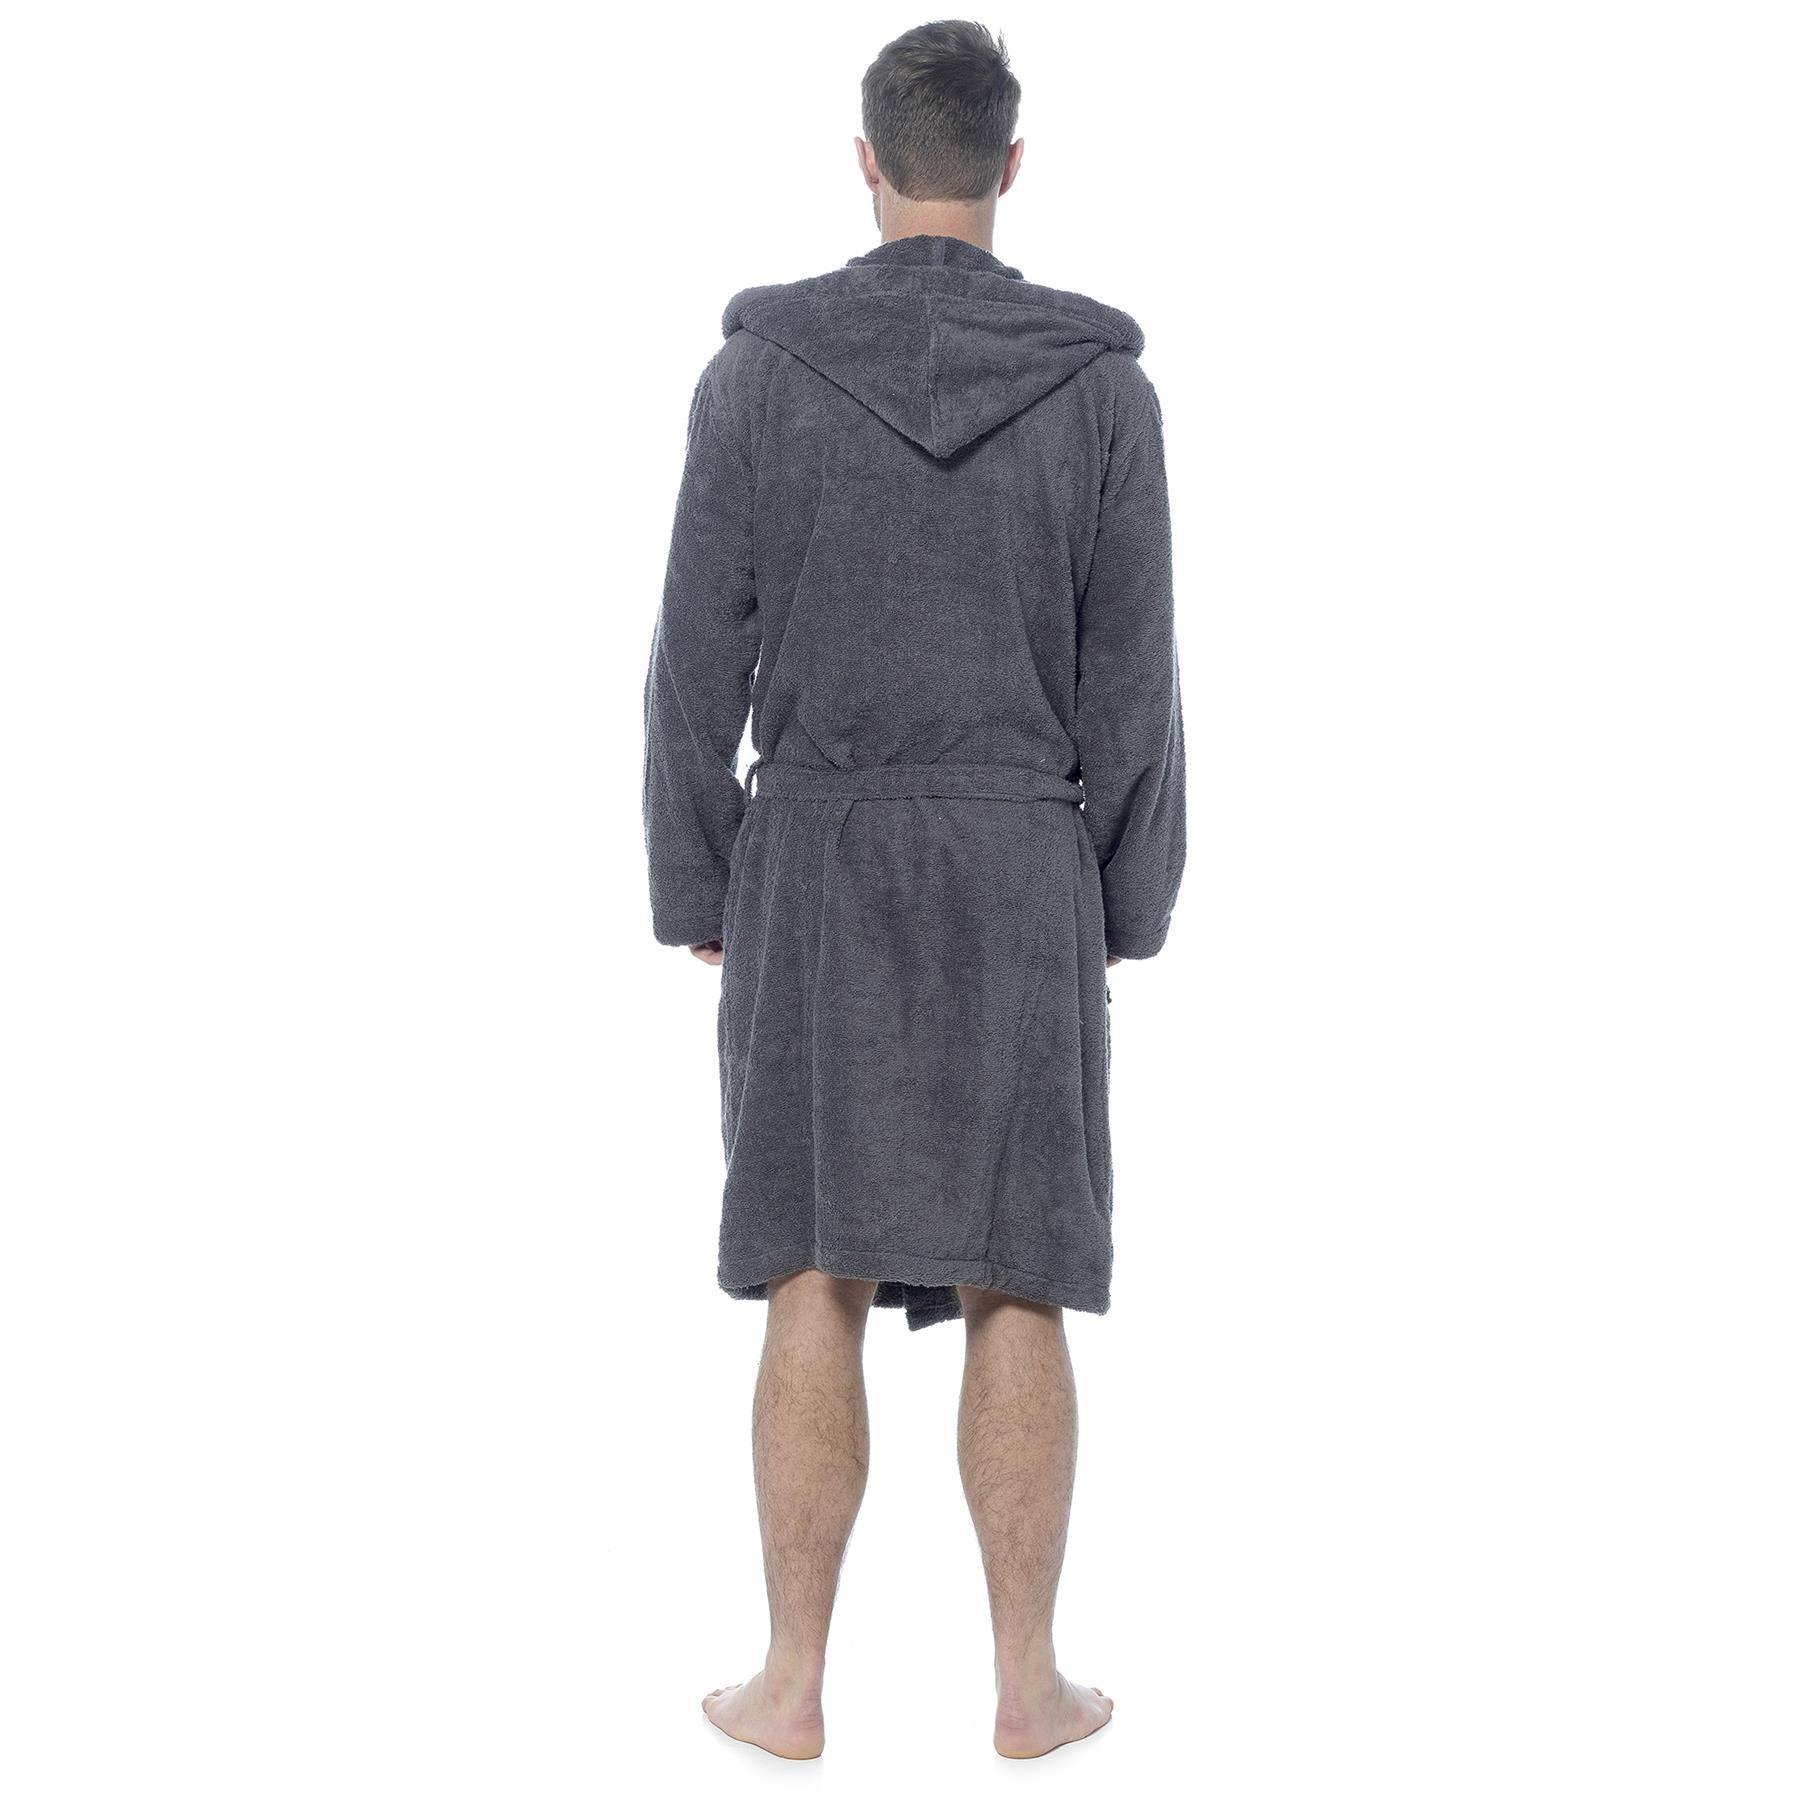 White Hooded Towelling Robe